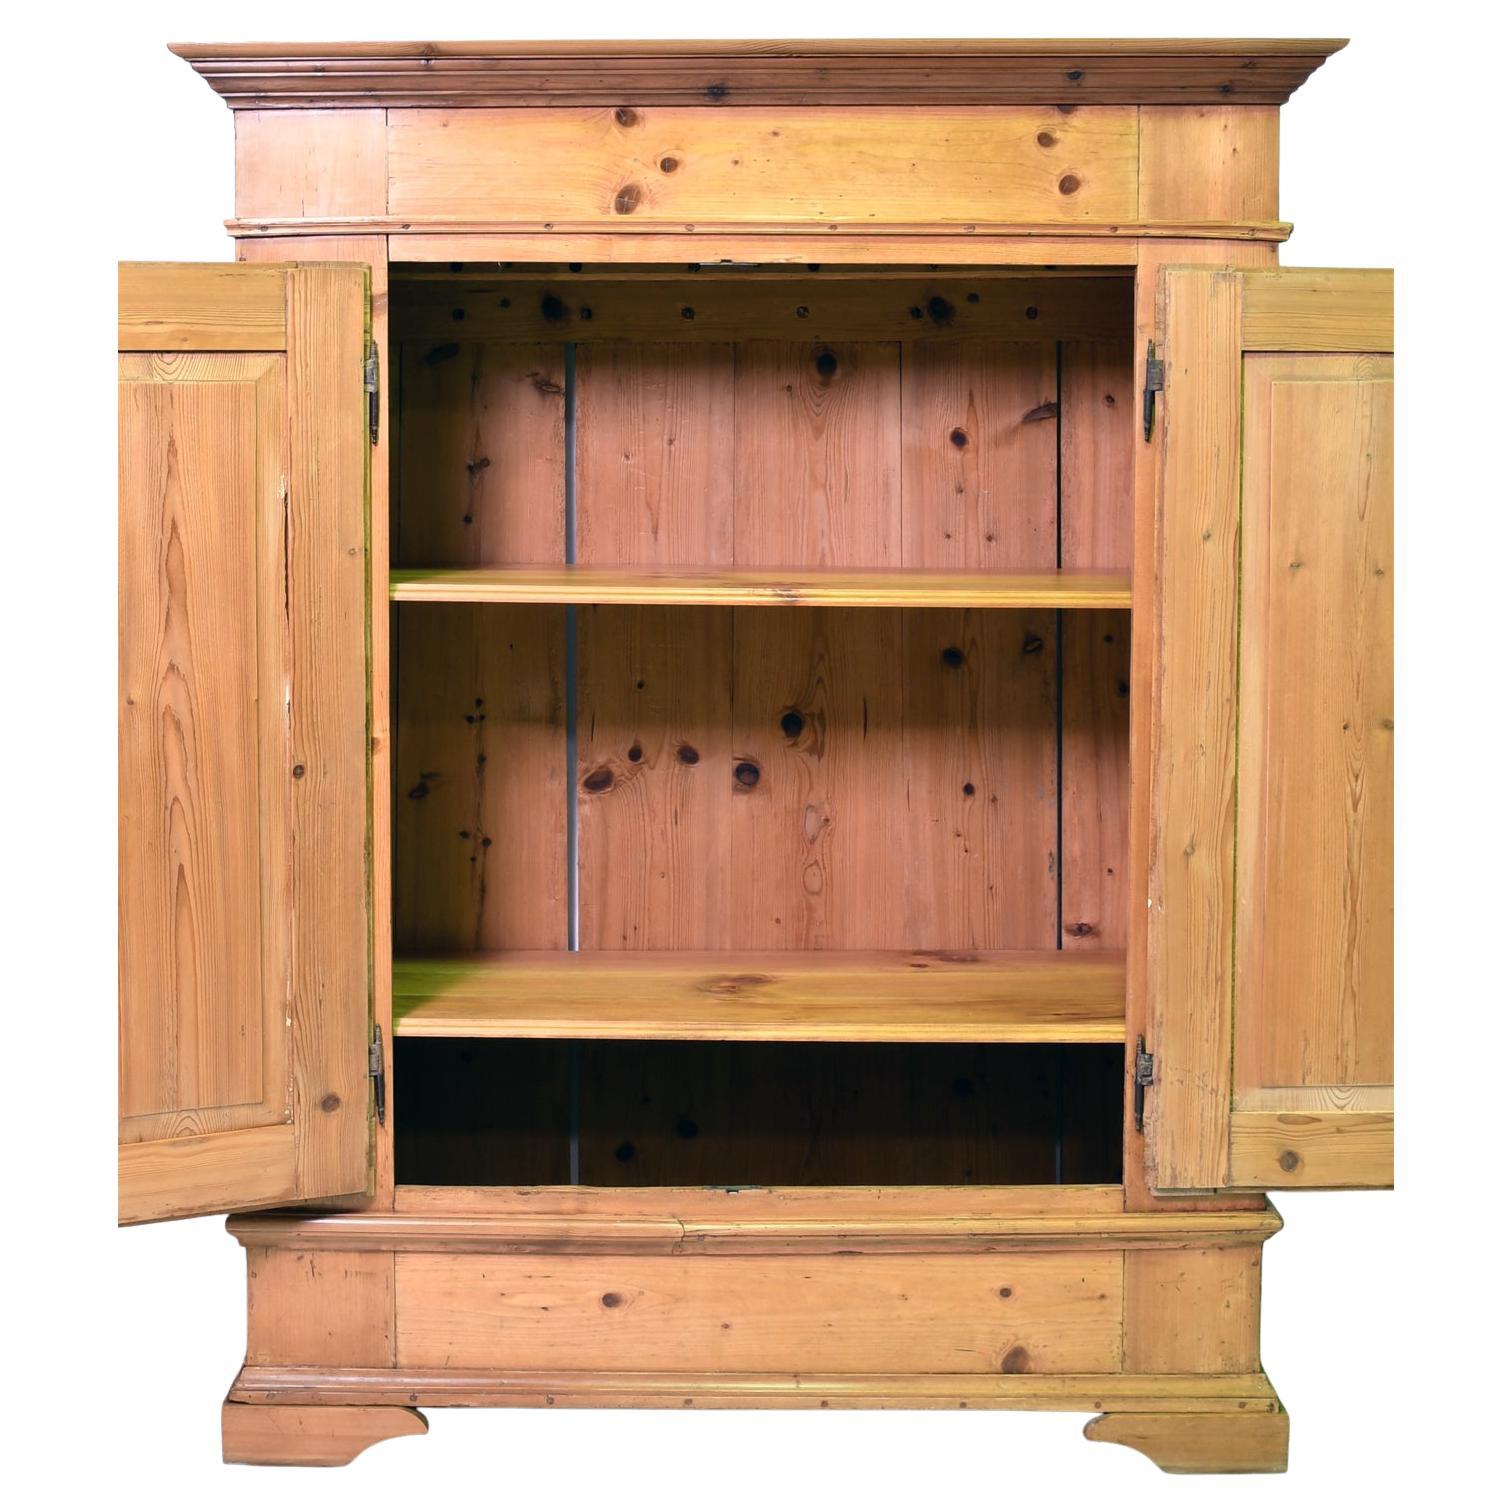 Hand-Crafted Antique European Pine Armoire with Interior Adjustable Shelves, circa 1850